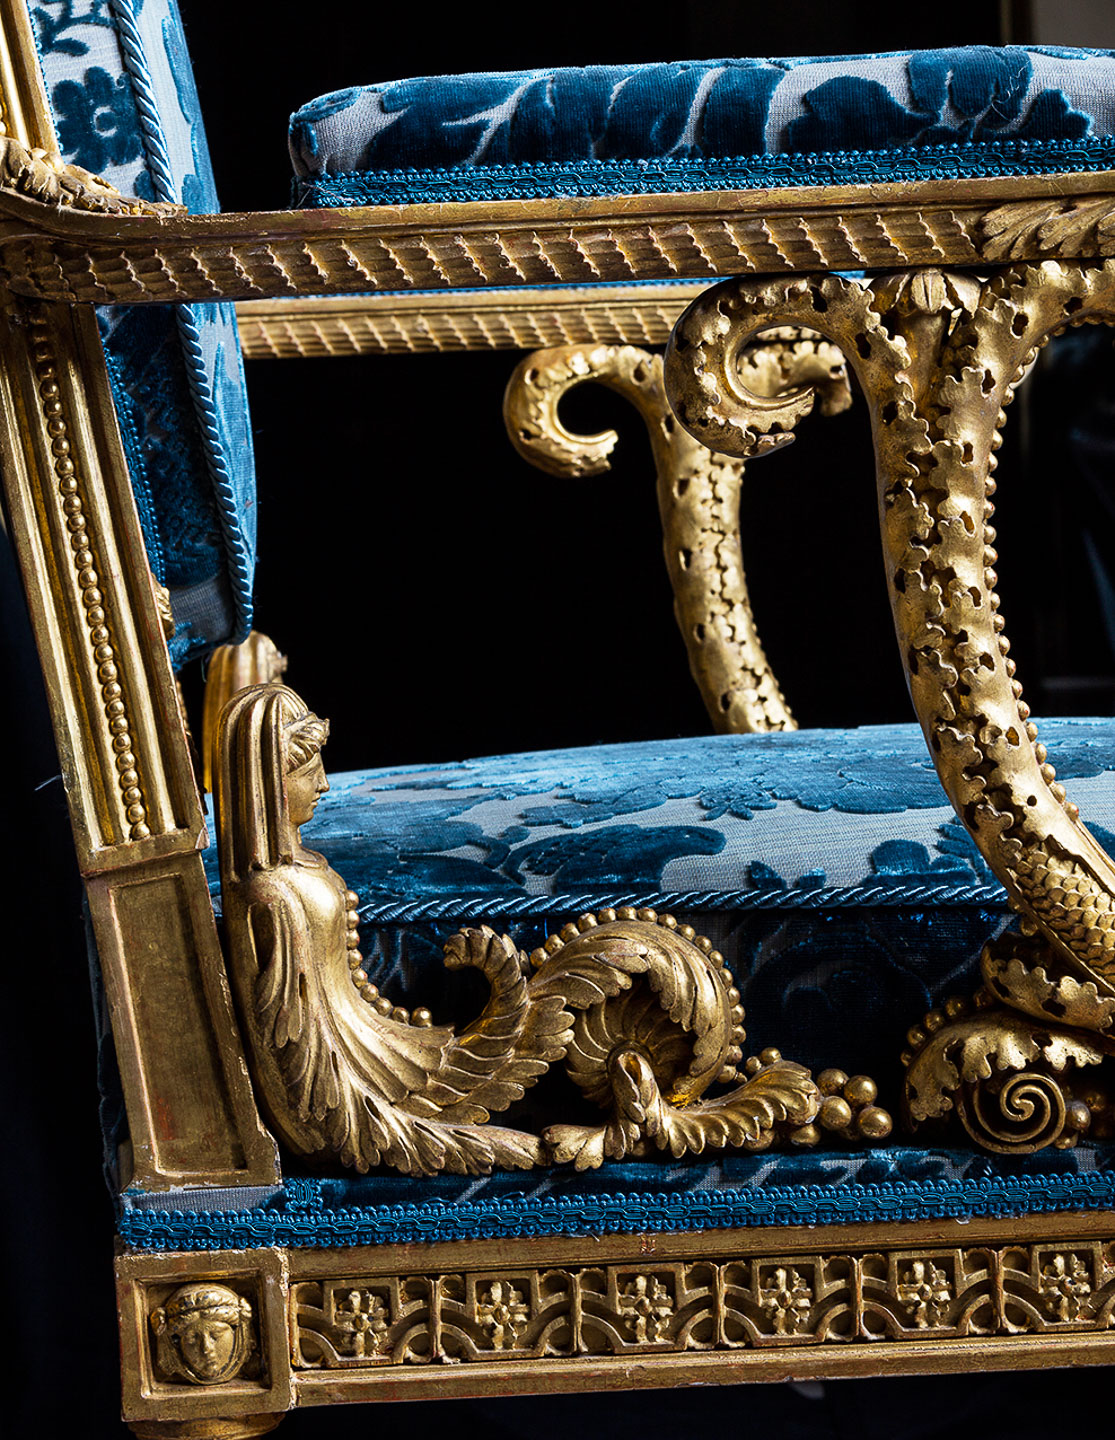 Villa Balbiano luxury private estate on lake Como unique art collection 18th century blue chair from Habsburg royal family collection detail 27.left000VB int